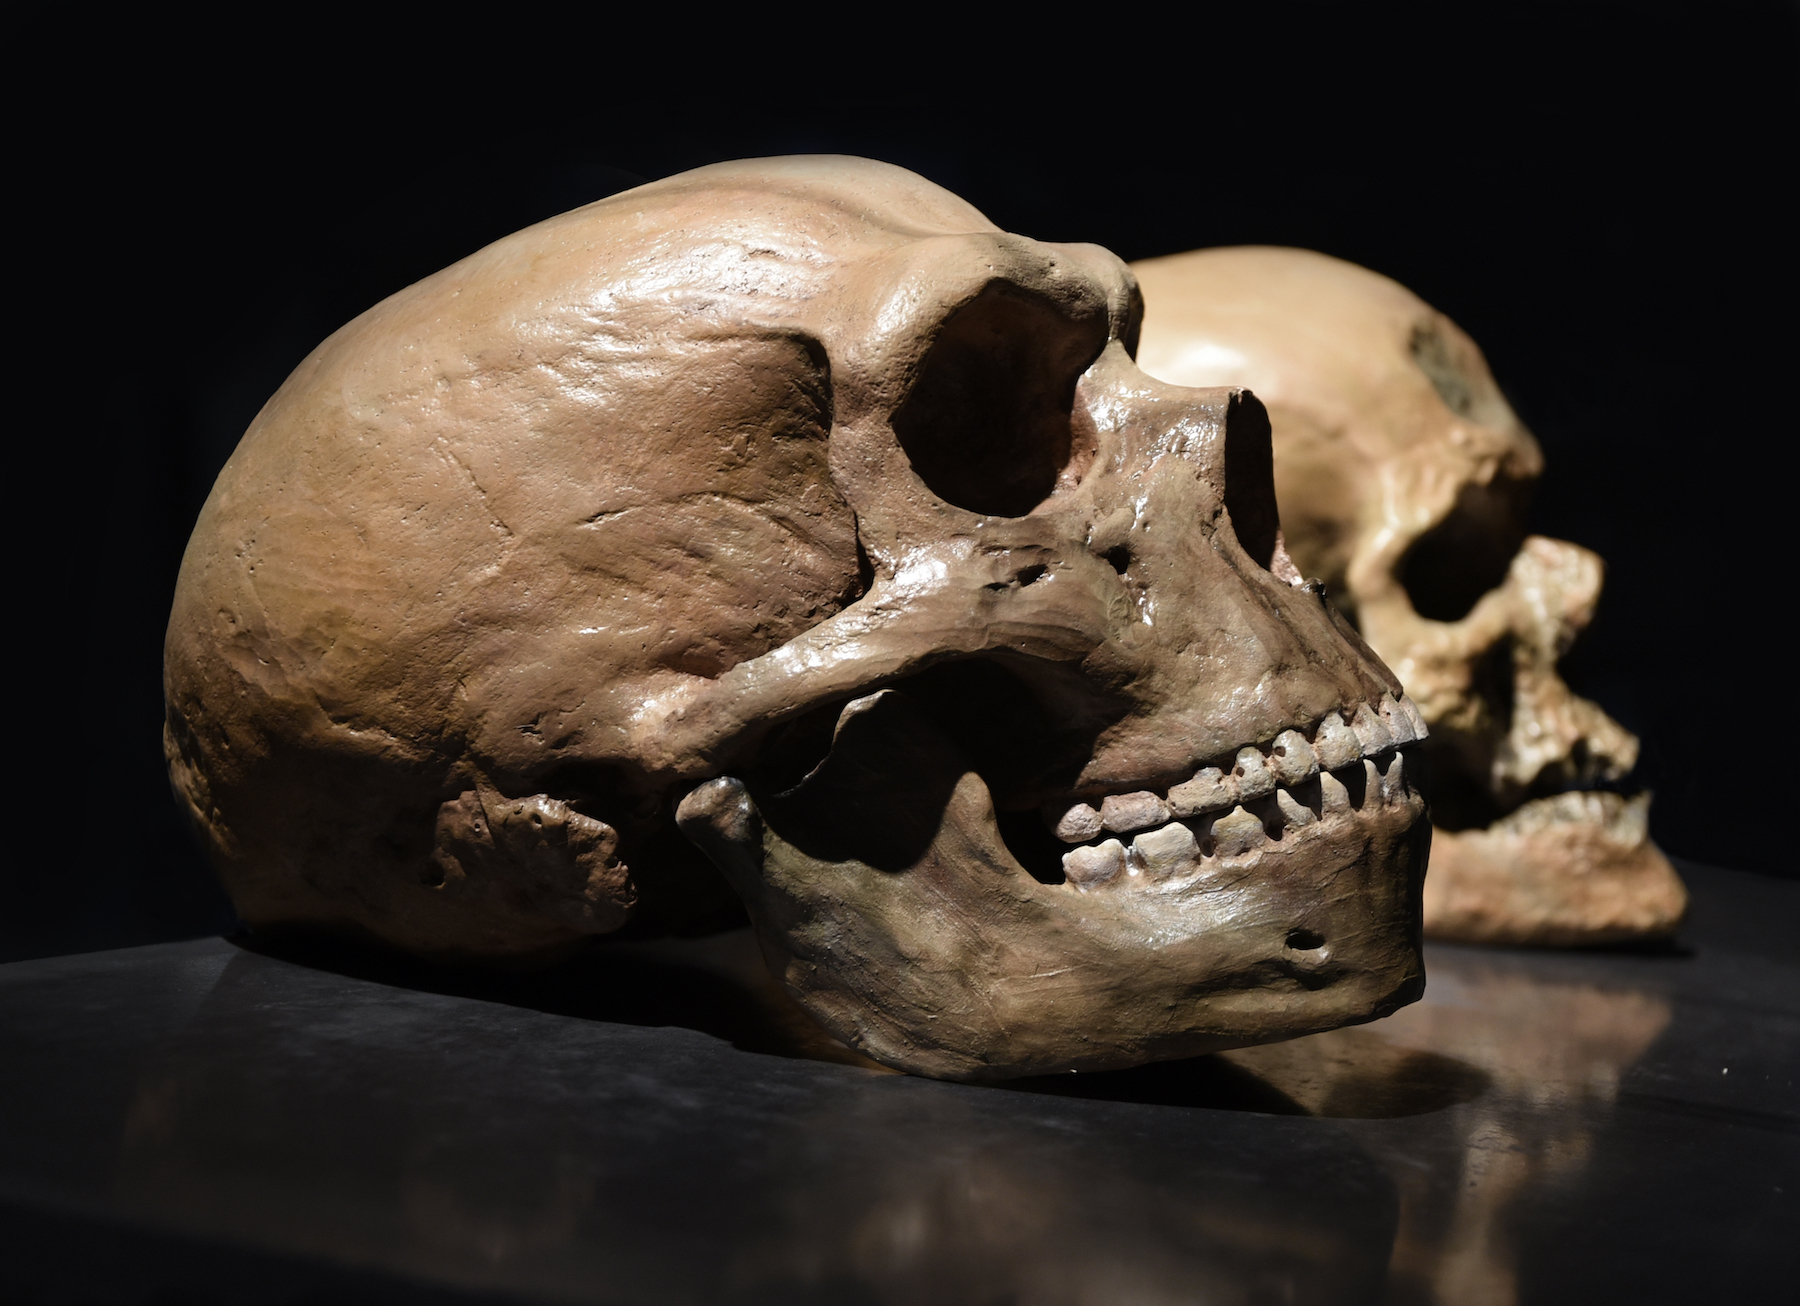 Neanderthal skull in front of a human skull. The two have distinct differences in the brow and chin areas.